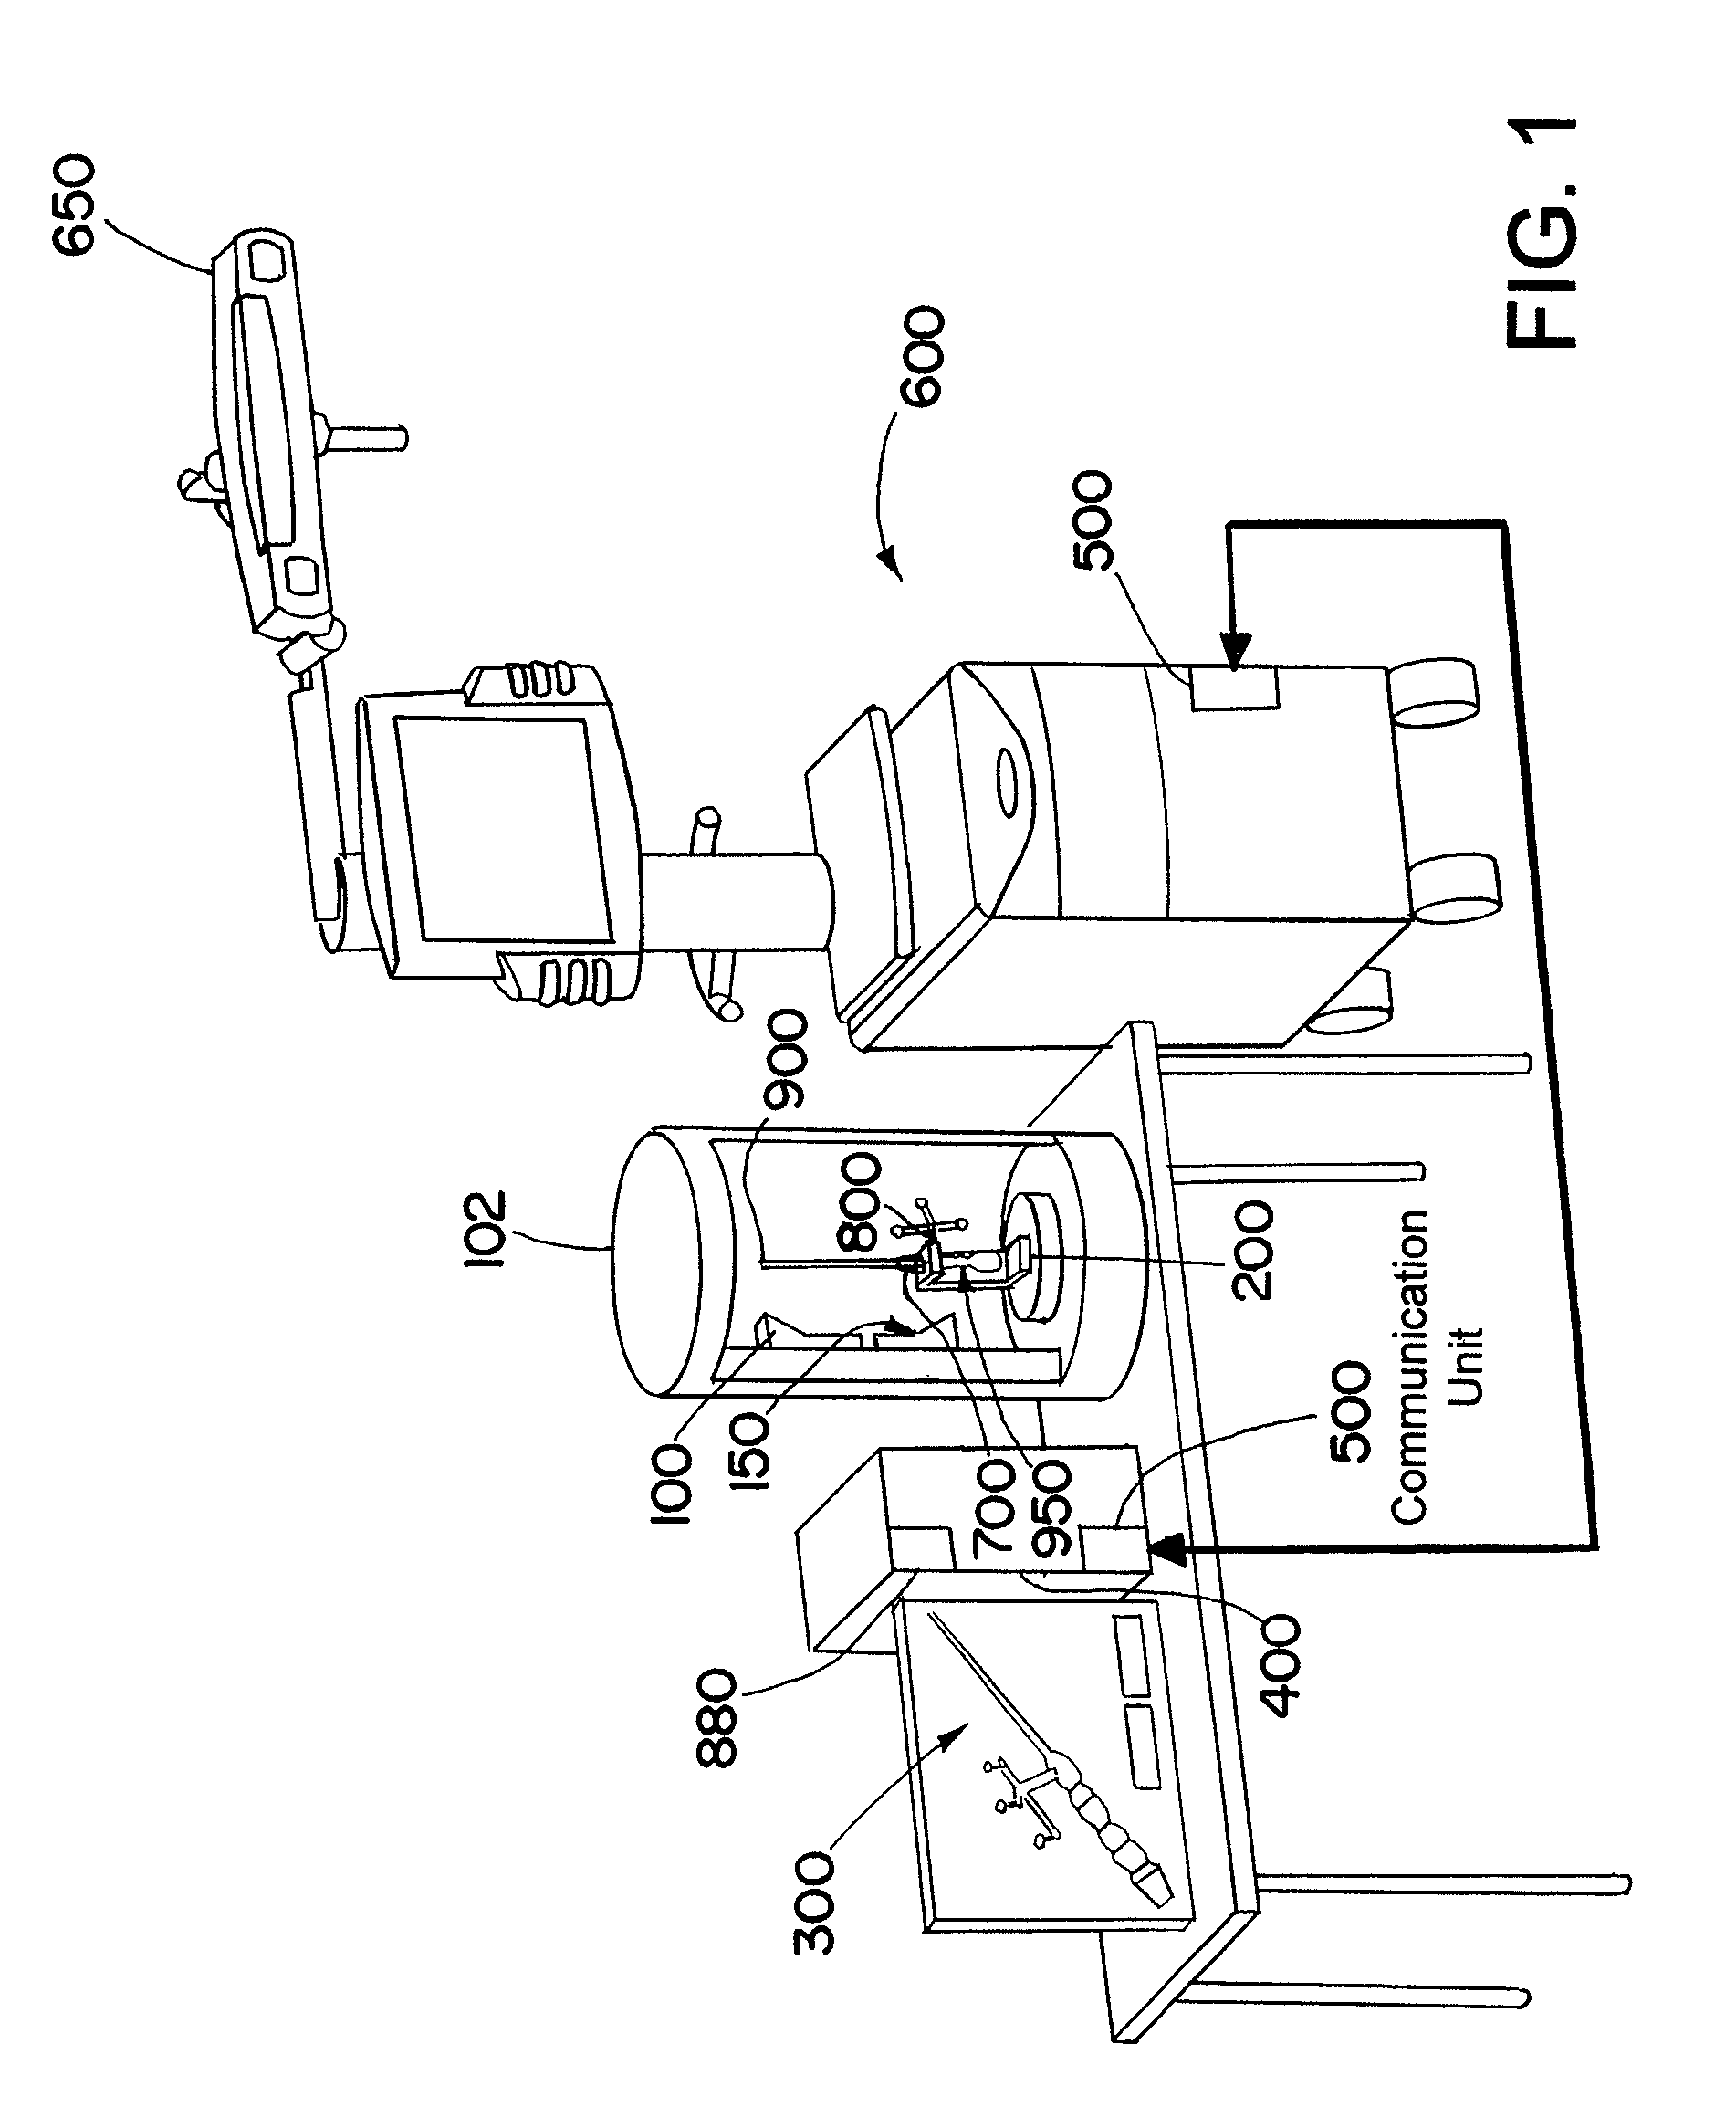 Geometrical properties measuring device for a medical treatment device including an RFID transponder